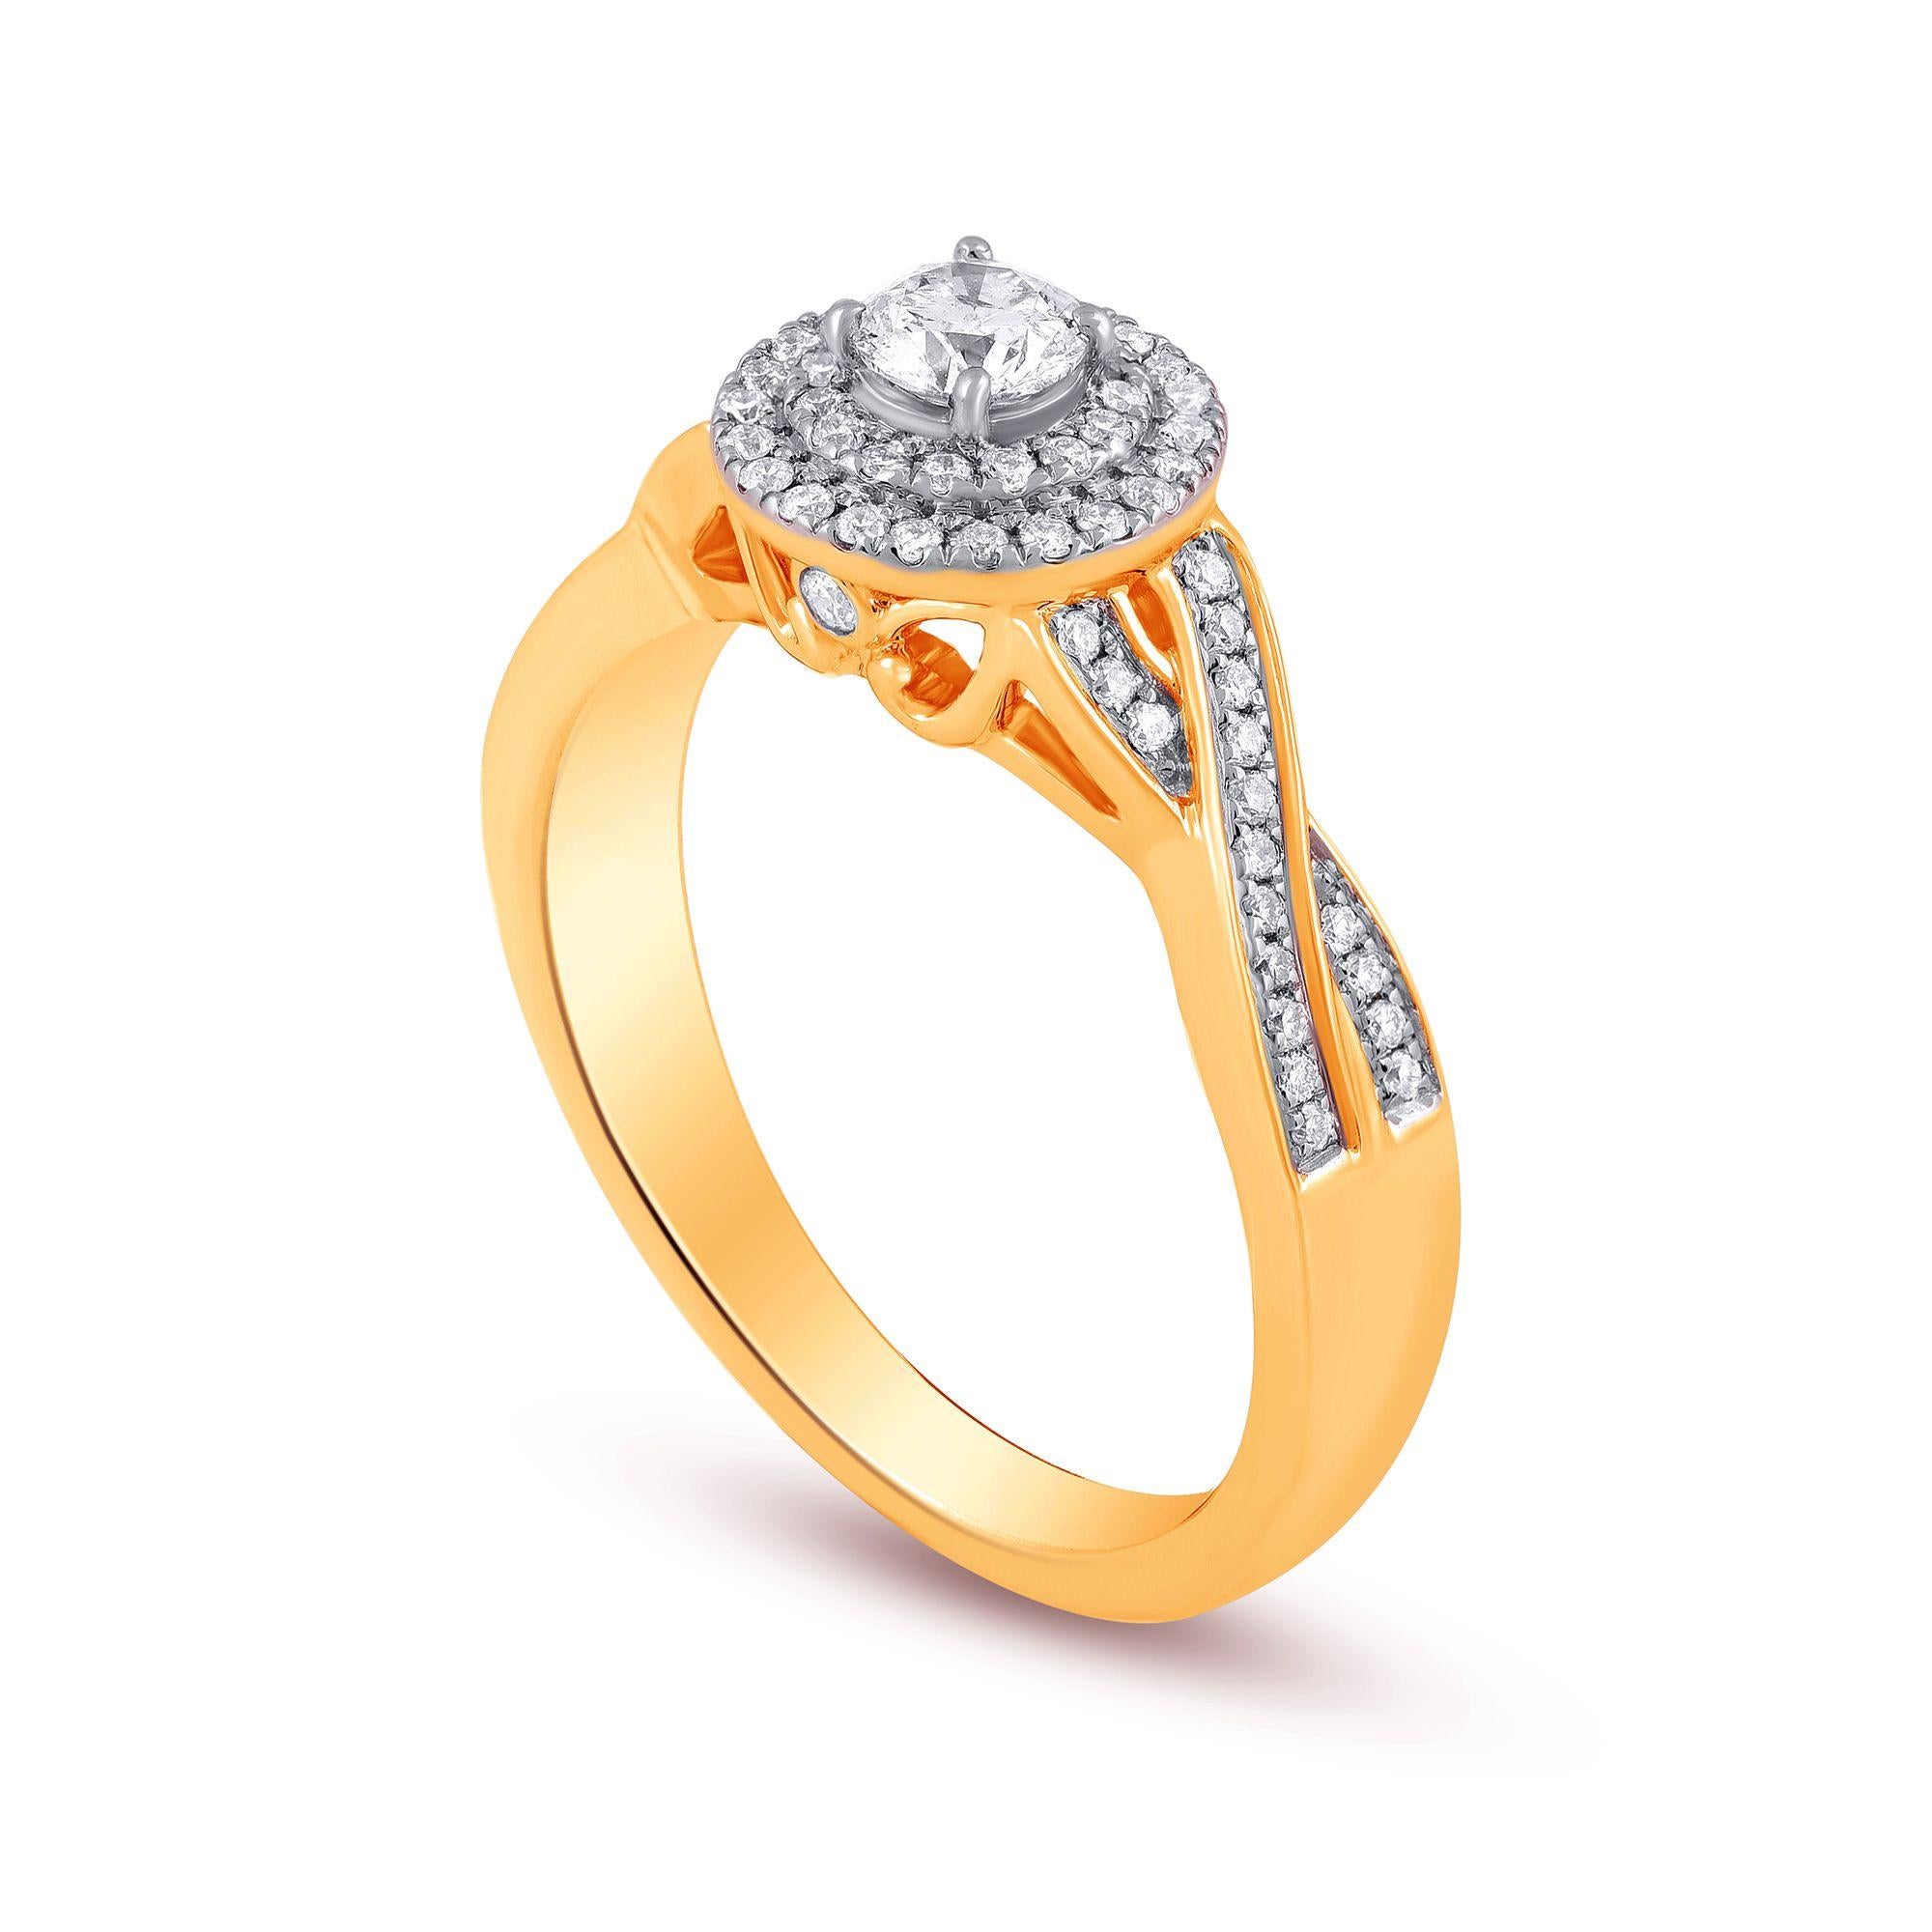 A beautifully designed engagement halo ring studded with 76 diamonds in prong, micro-pave and bezel setting. The ring is crafted in 14 Karat Yellow Gold. The ring is available in multiple sizes.  Diamonds are graded G-H Color, I1-I2 Clarity. 
